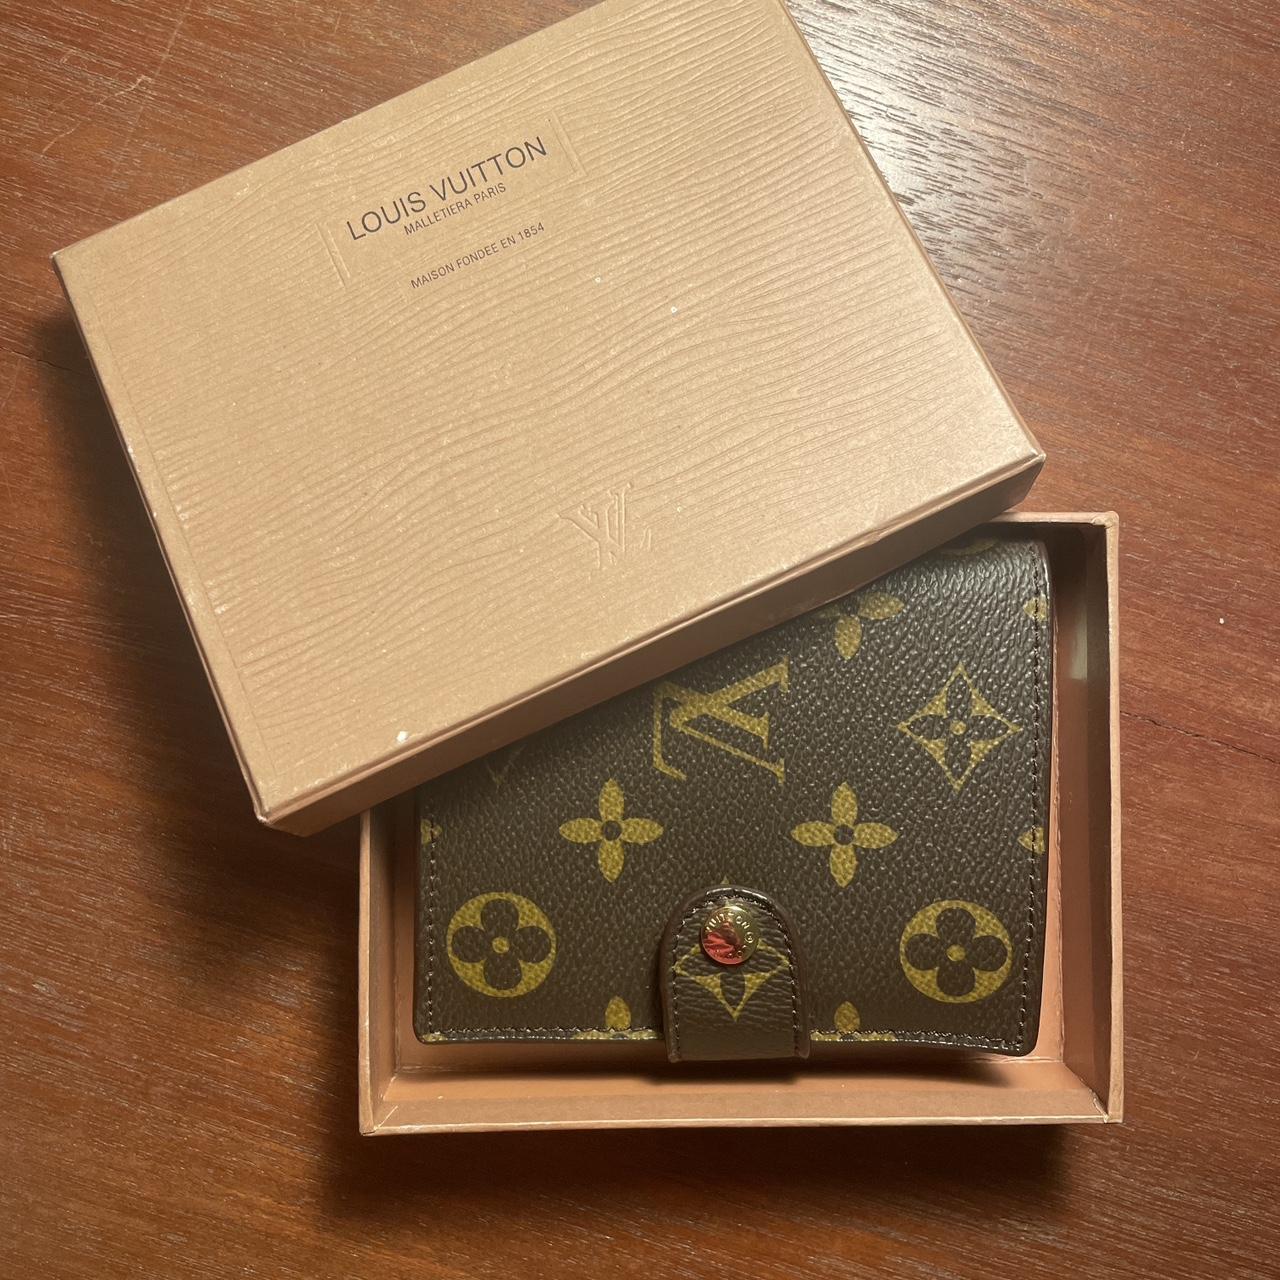 LOUIS VUITTON WALLET. comes with box. Coin pouch - - Depop